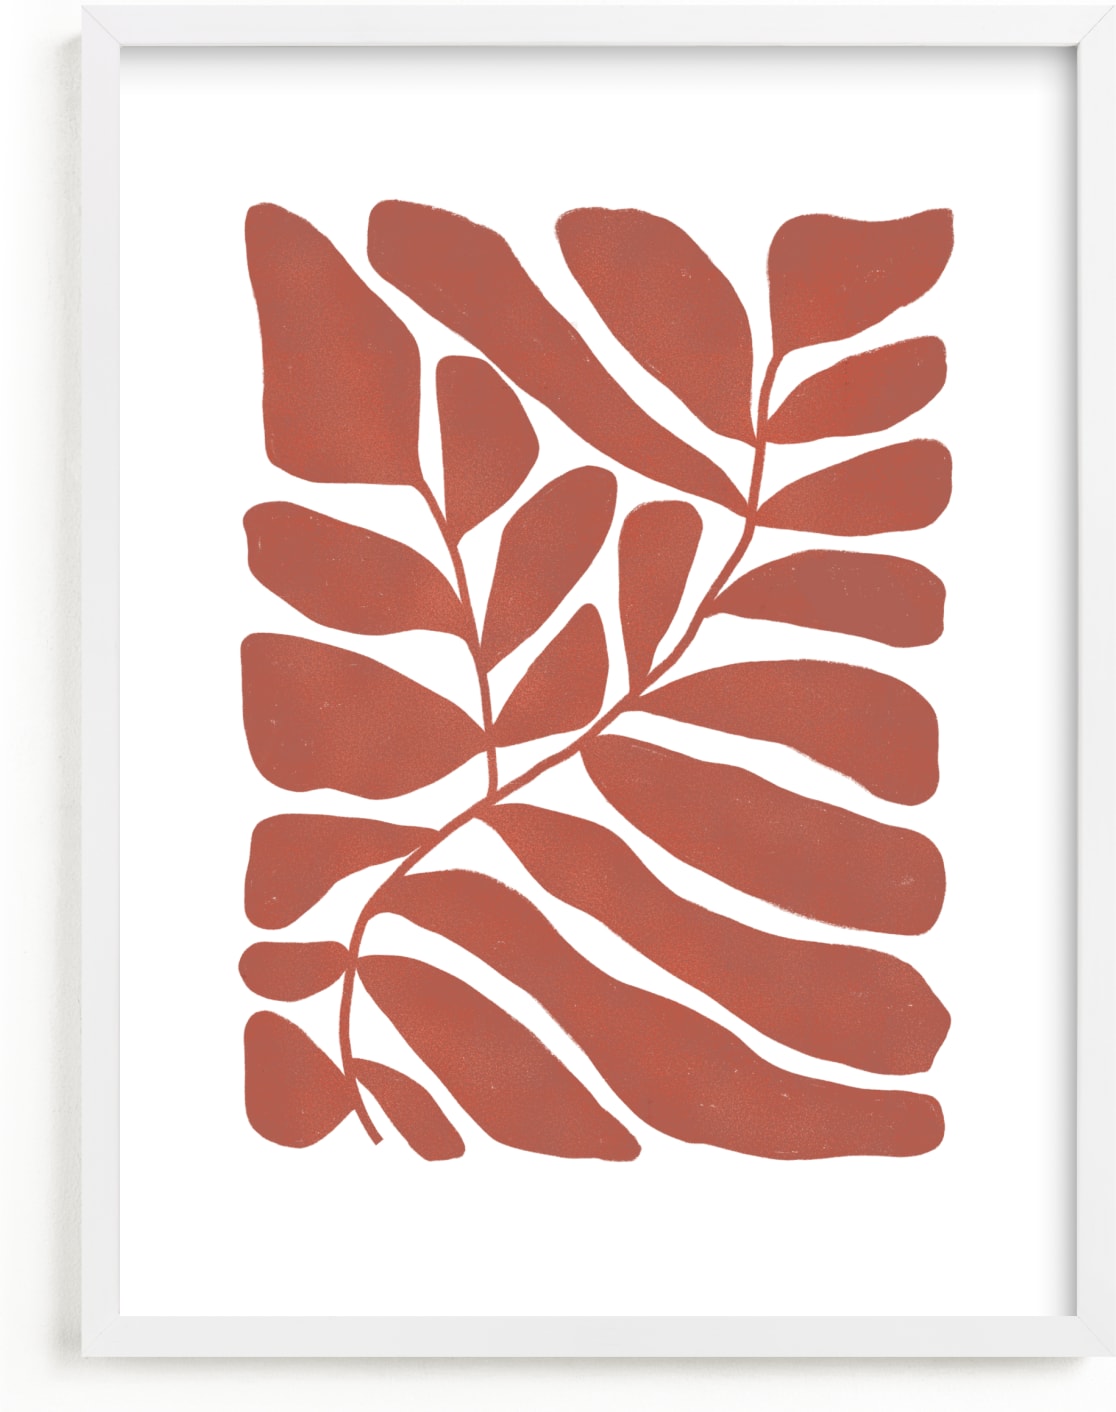 This is a red art by Kelly Ambrose called Loopy Leaves I.